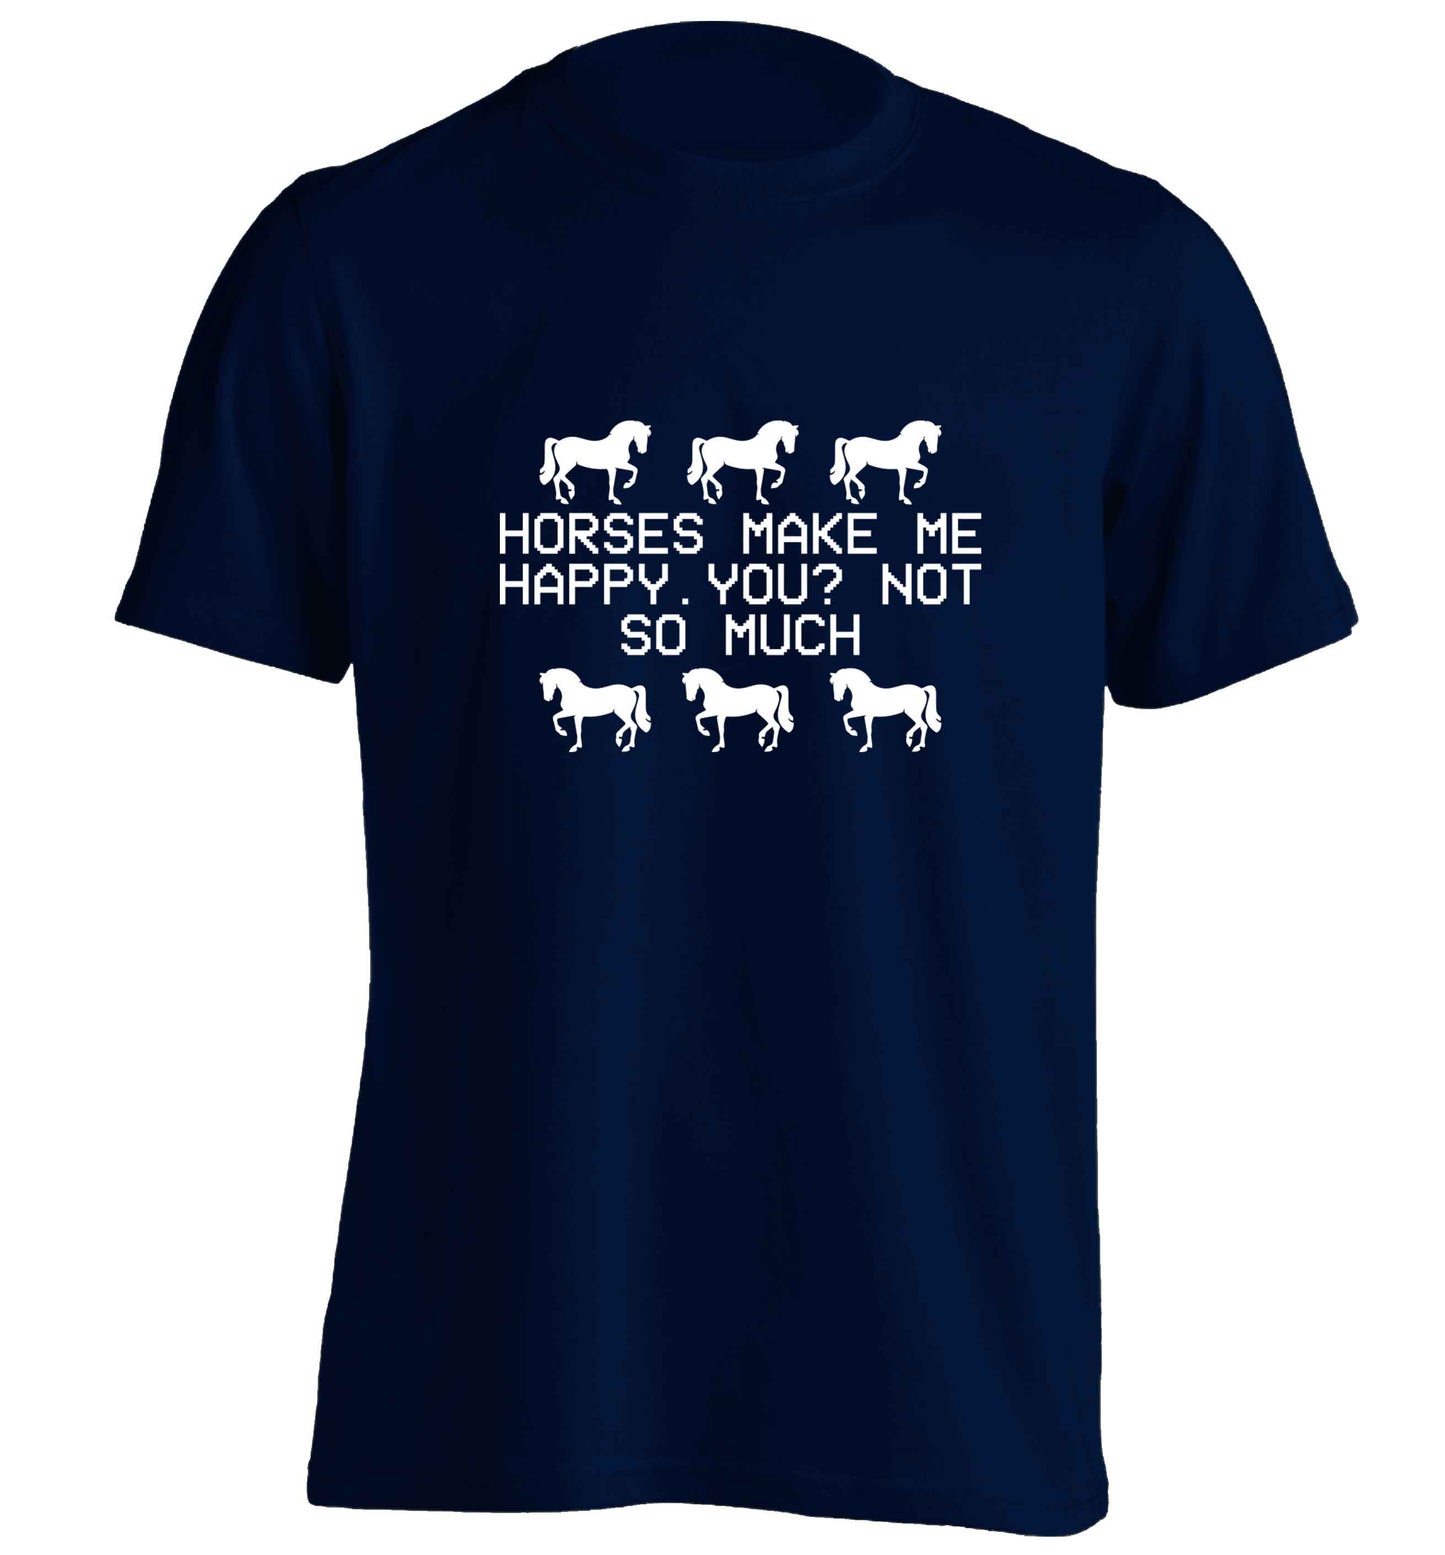 Horses make me happy, you not so much adults unisex navy Tshirt 2XL